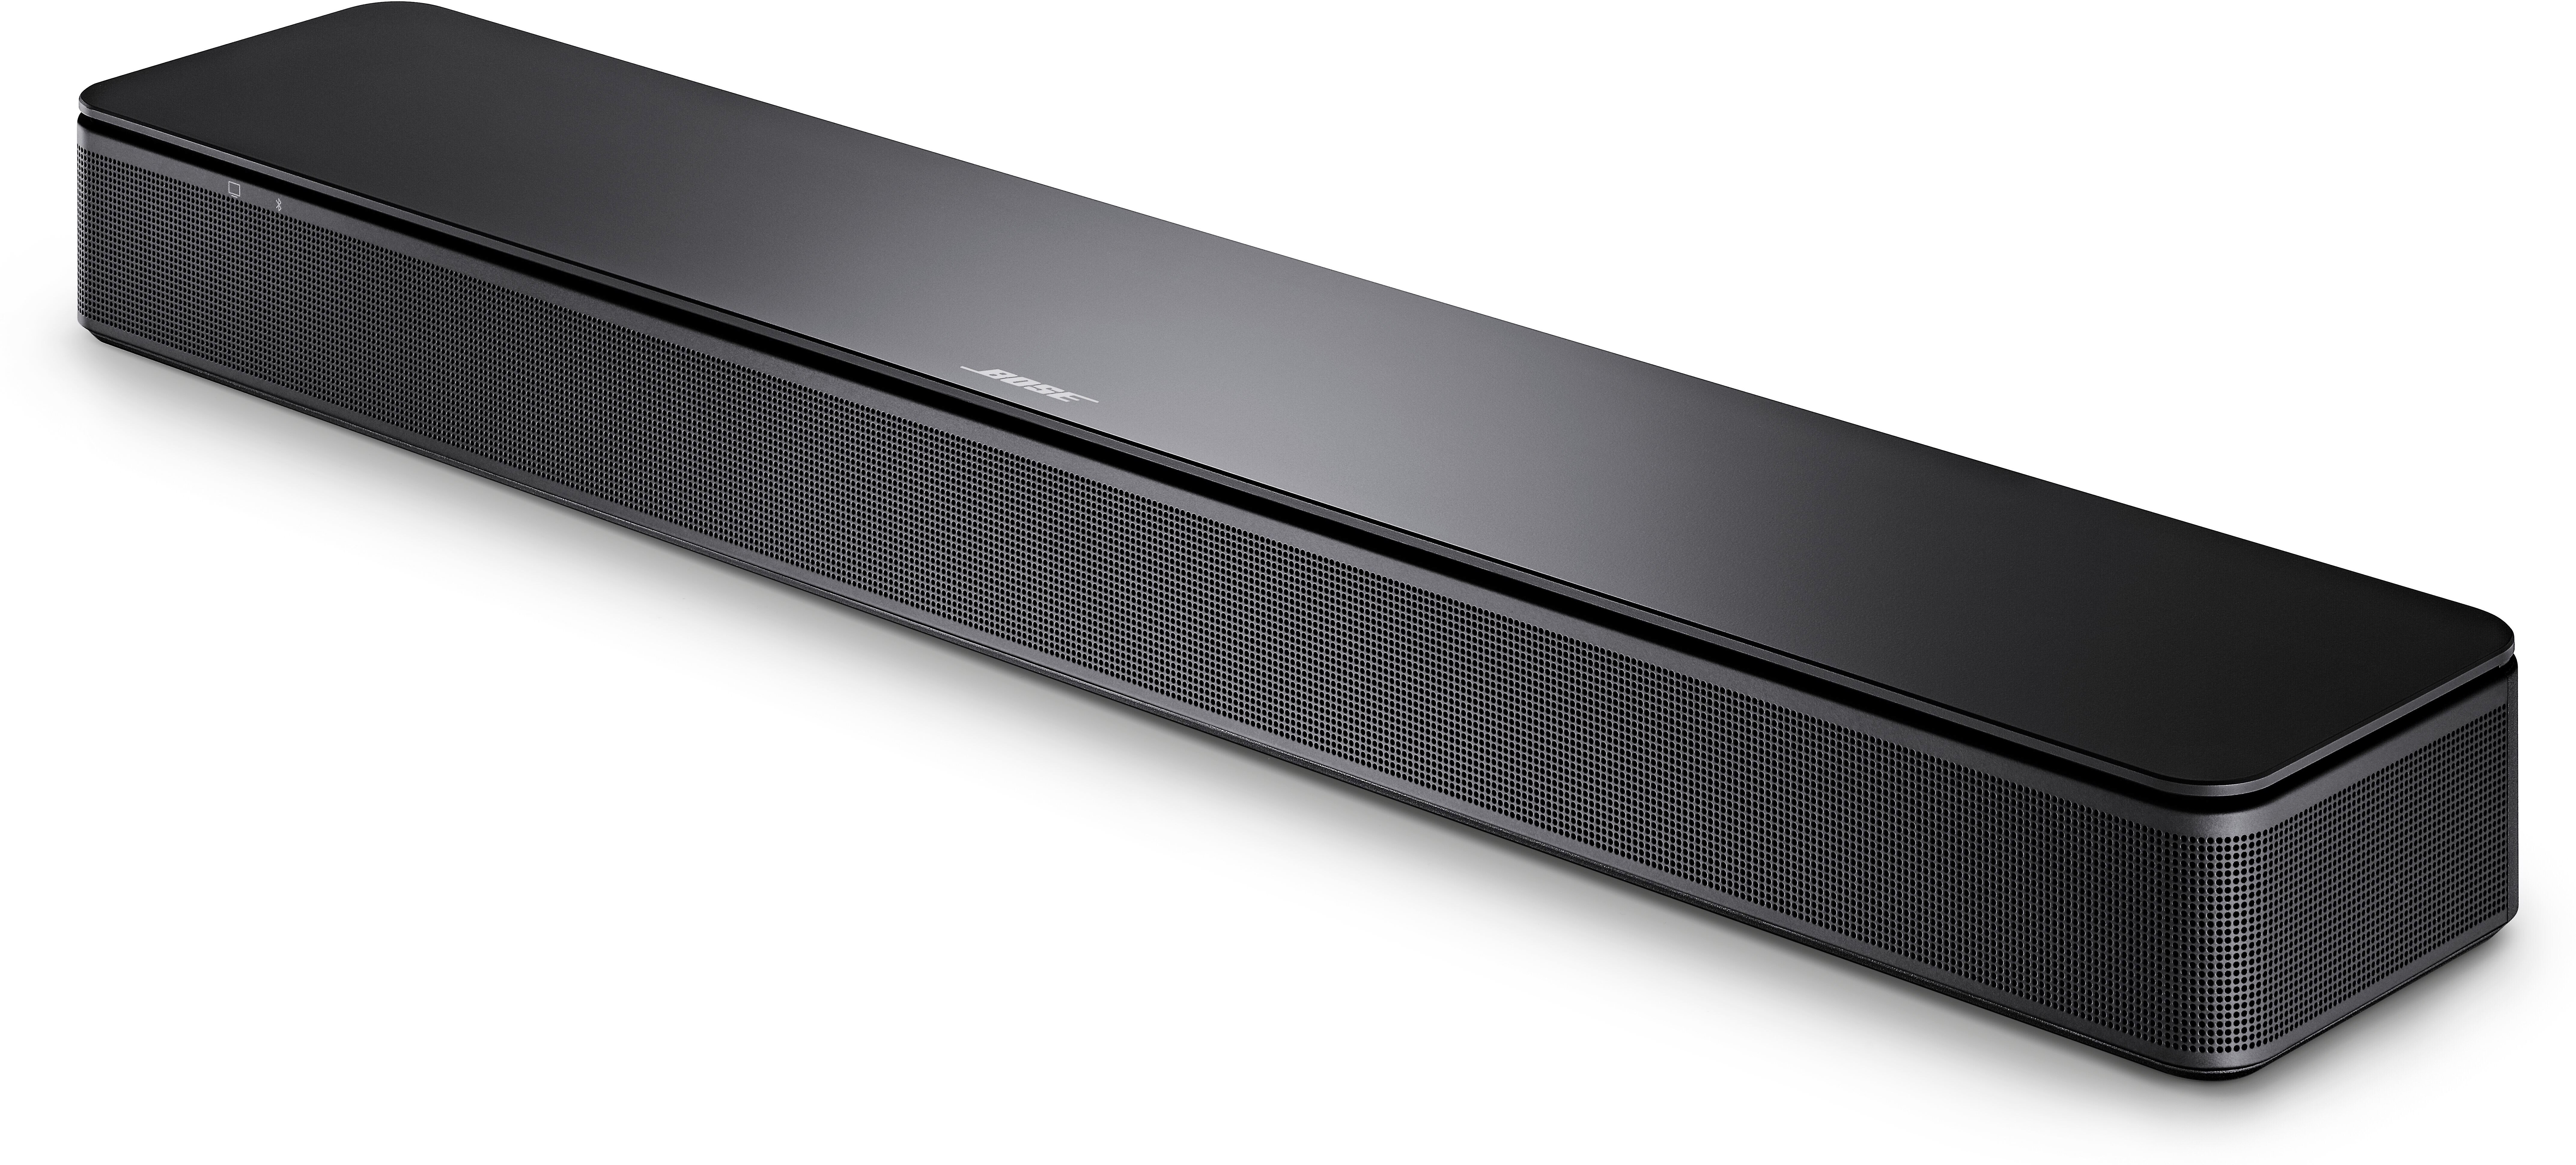 Customer Reviews: Bose TV Speaker Powered 3-channel sound bar with 